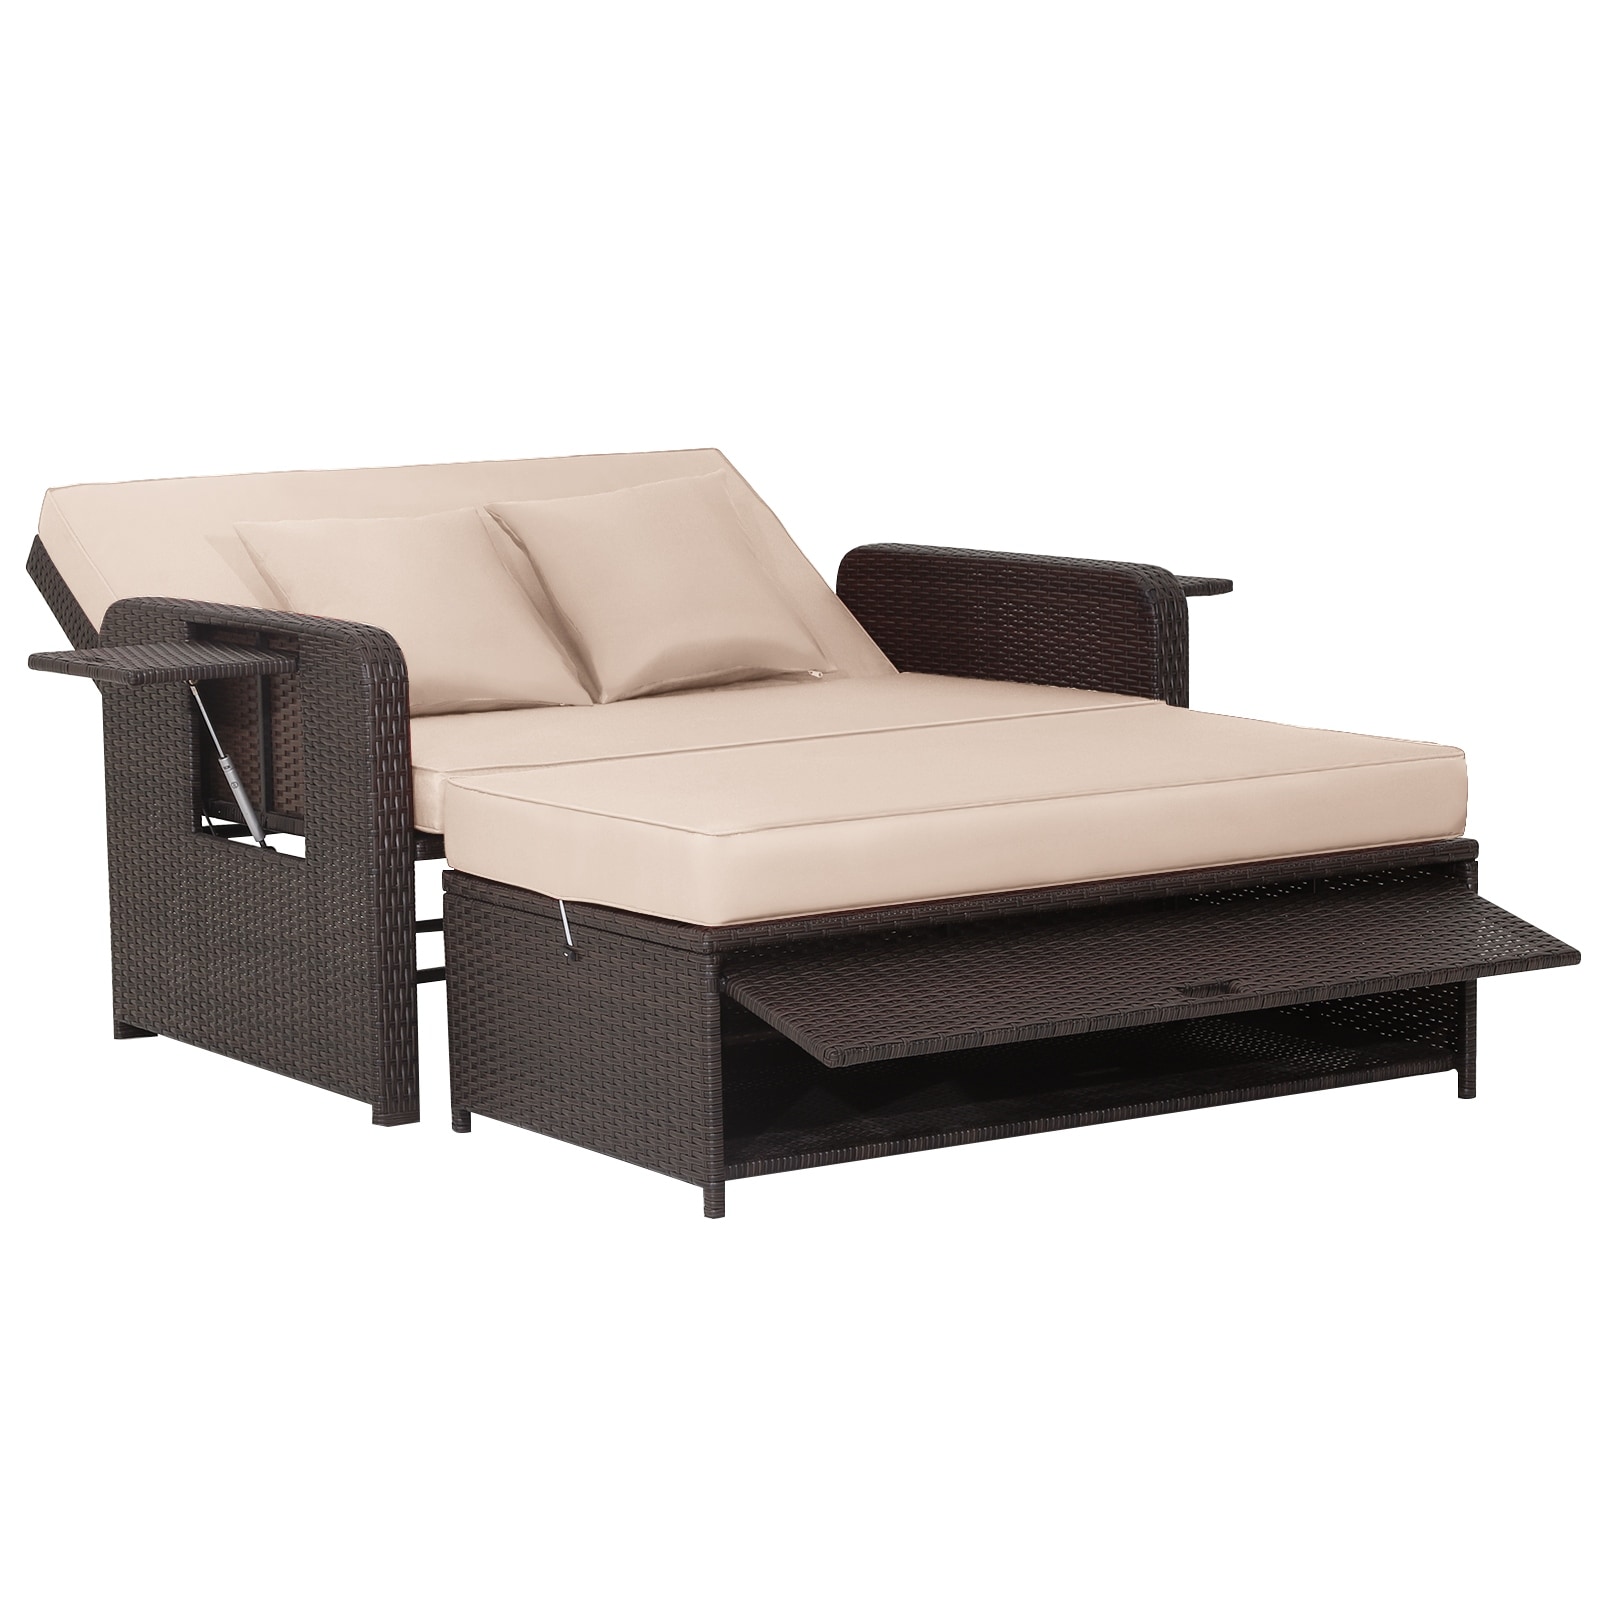 Costway Outdoor Chaise Lounges - Bed Bath & Beyond